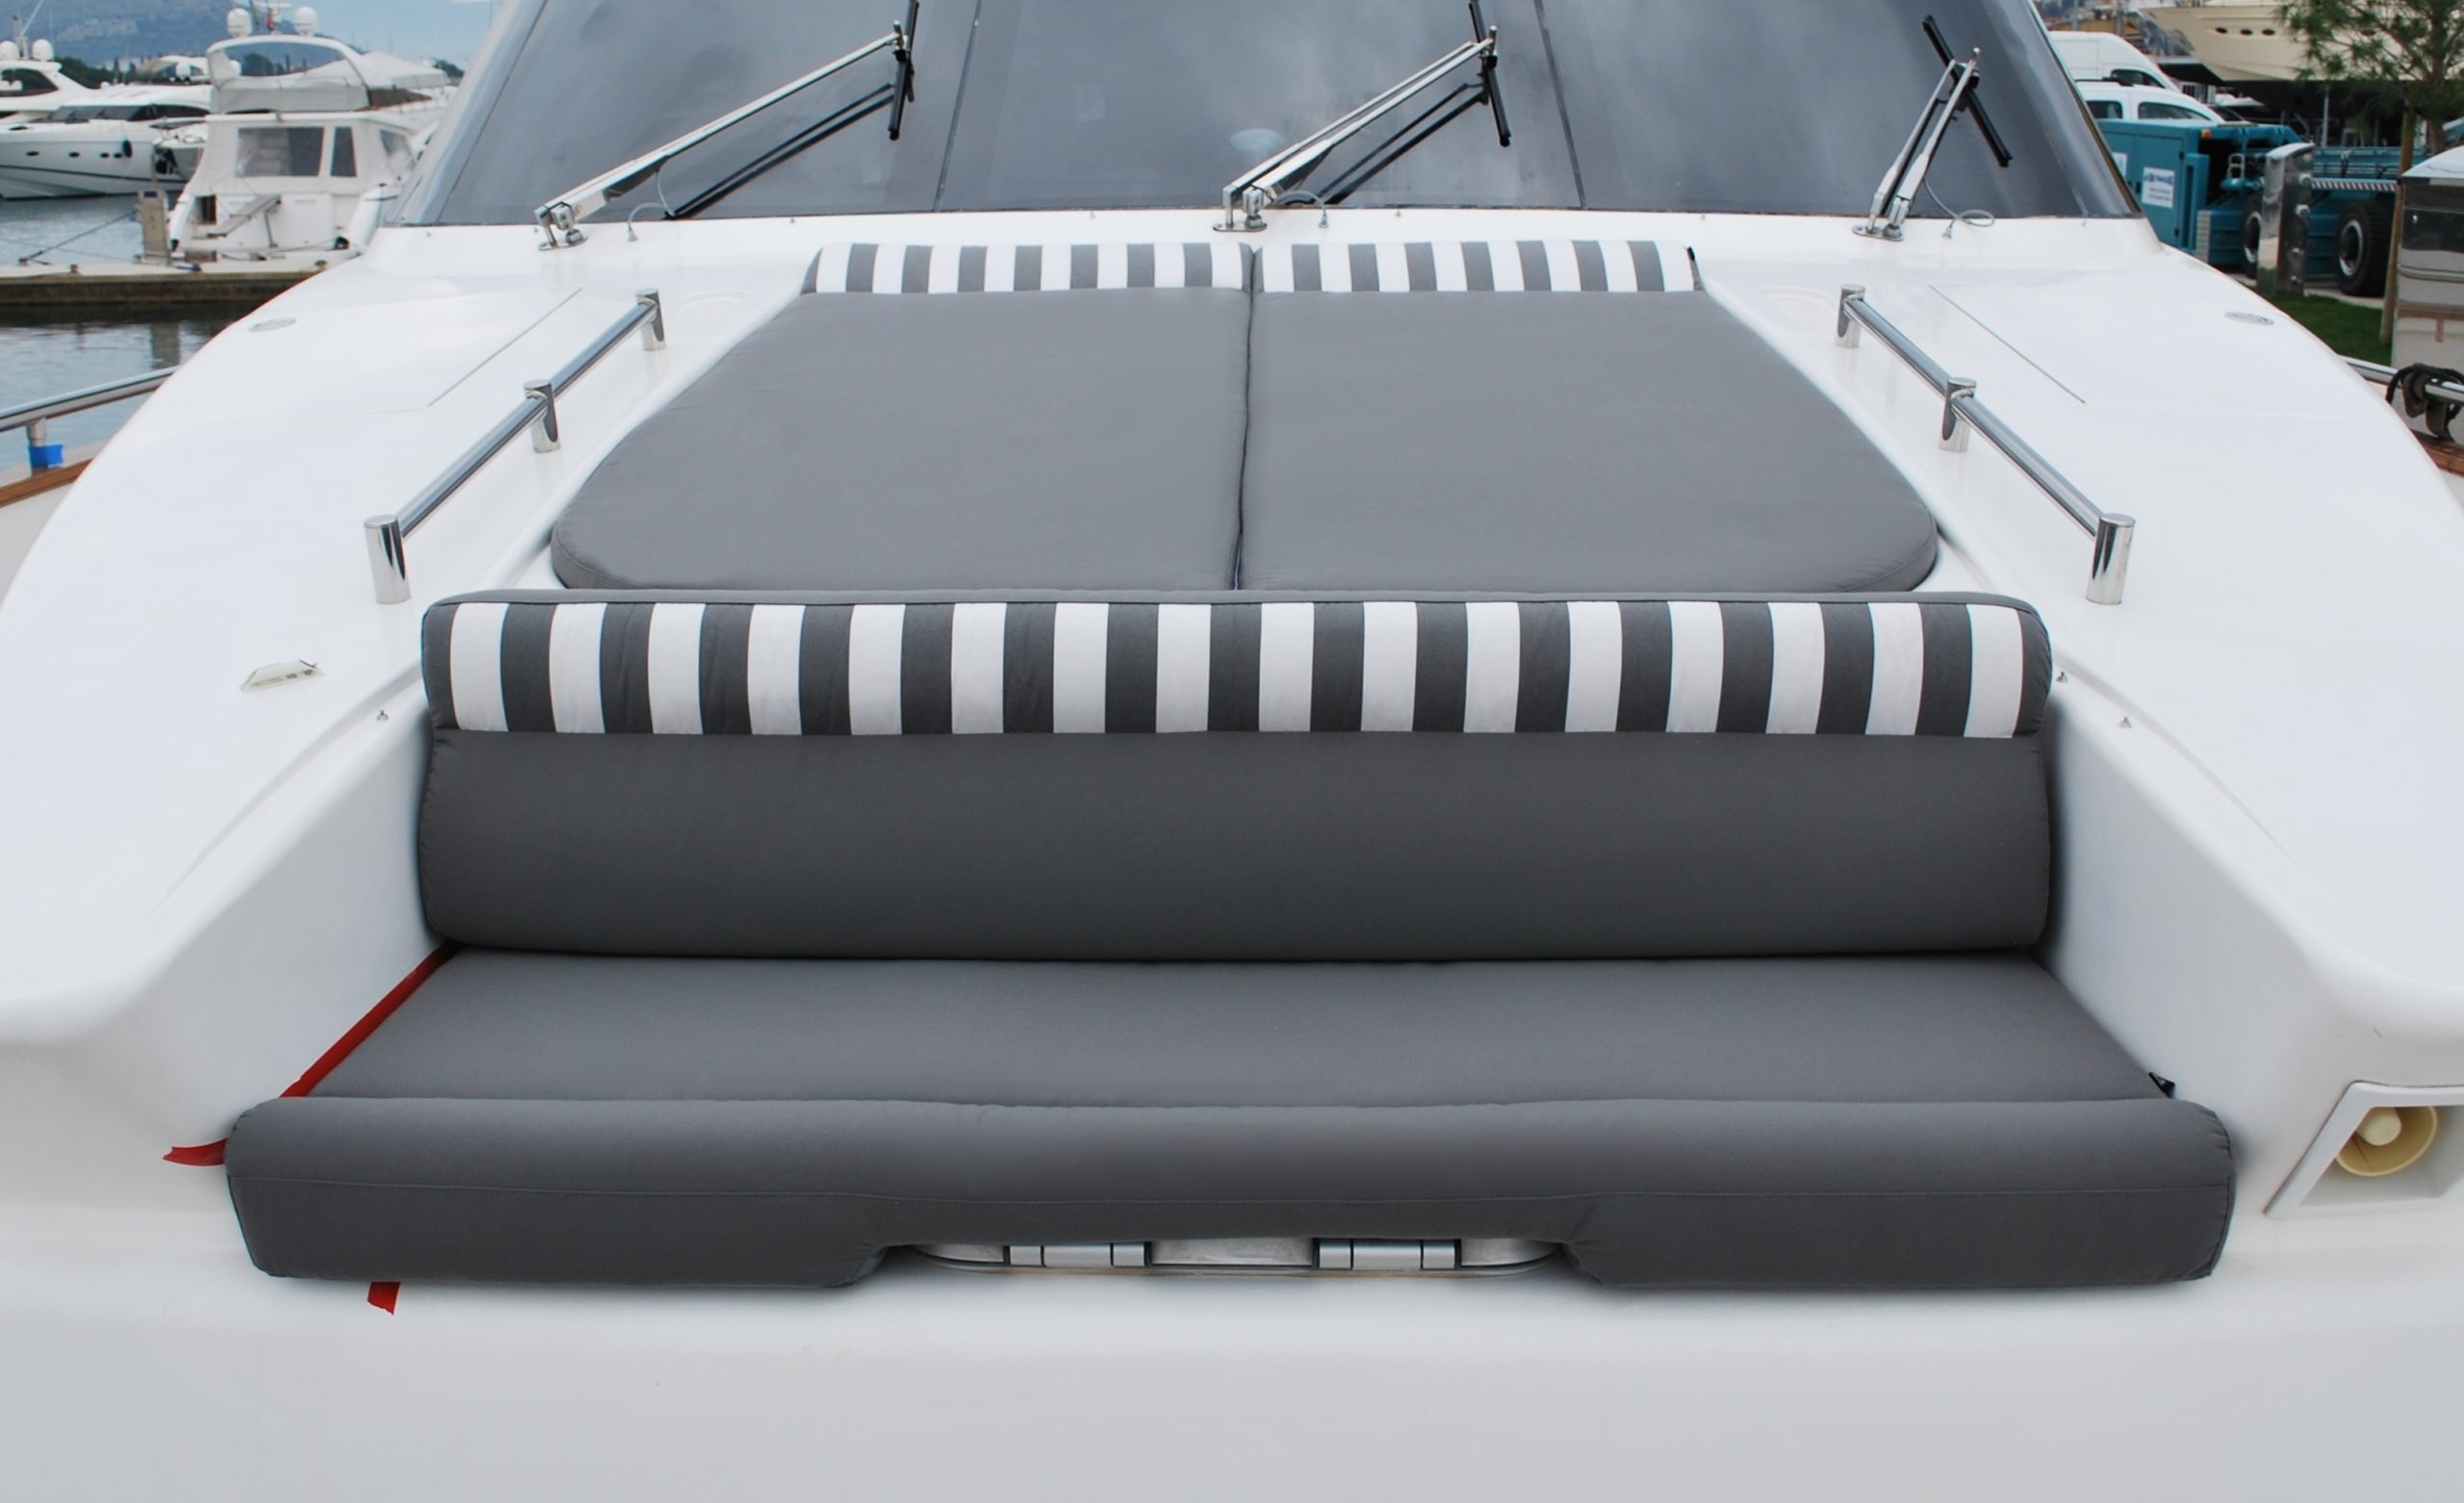 A dynamic look by separating sunbathing area from front seats on bow deck with cushions in charcoal grey and striped edging.